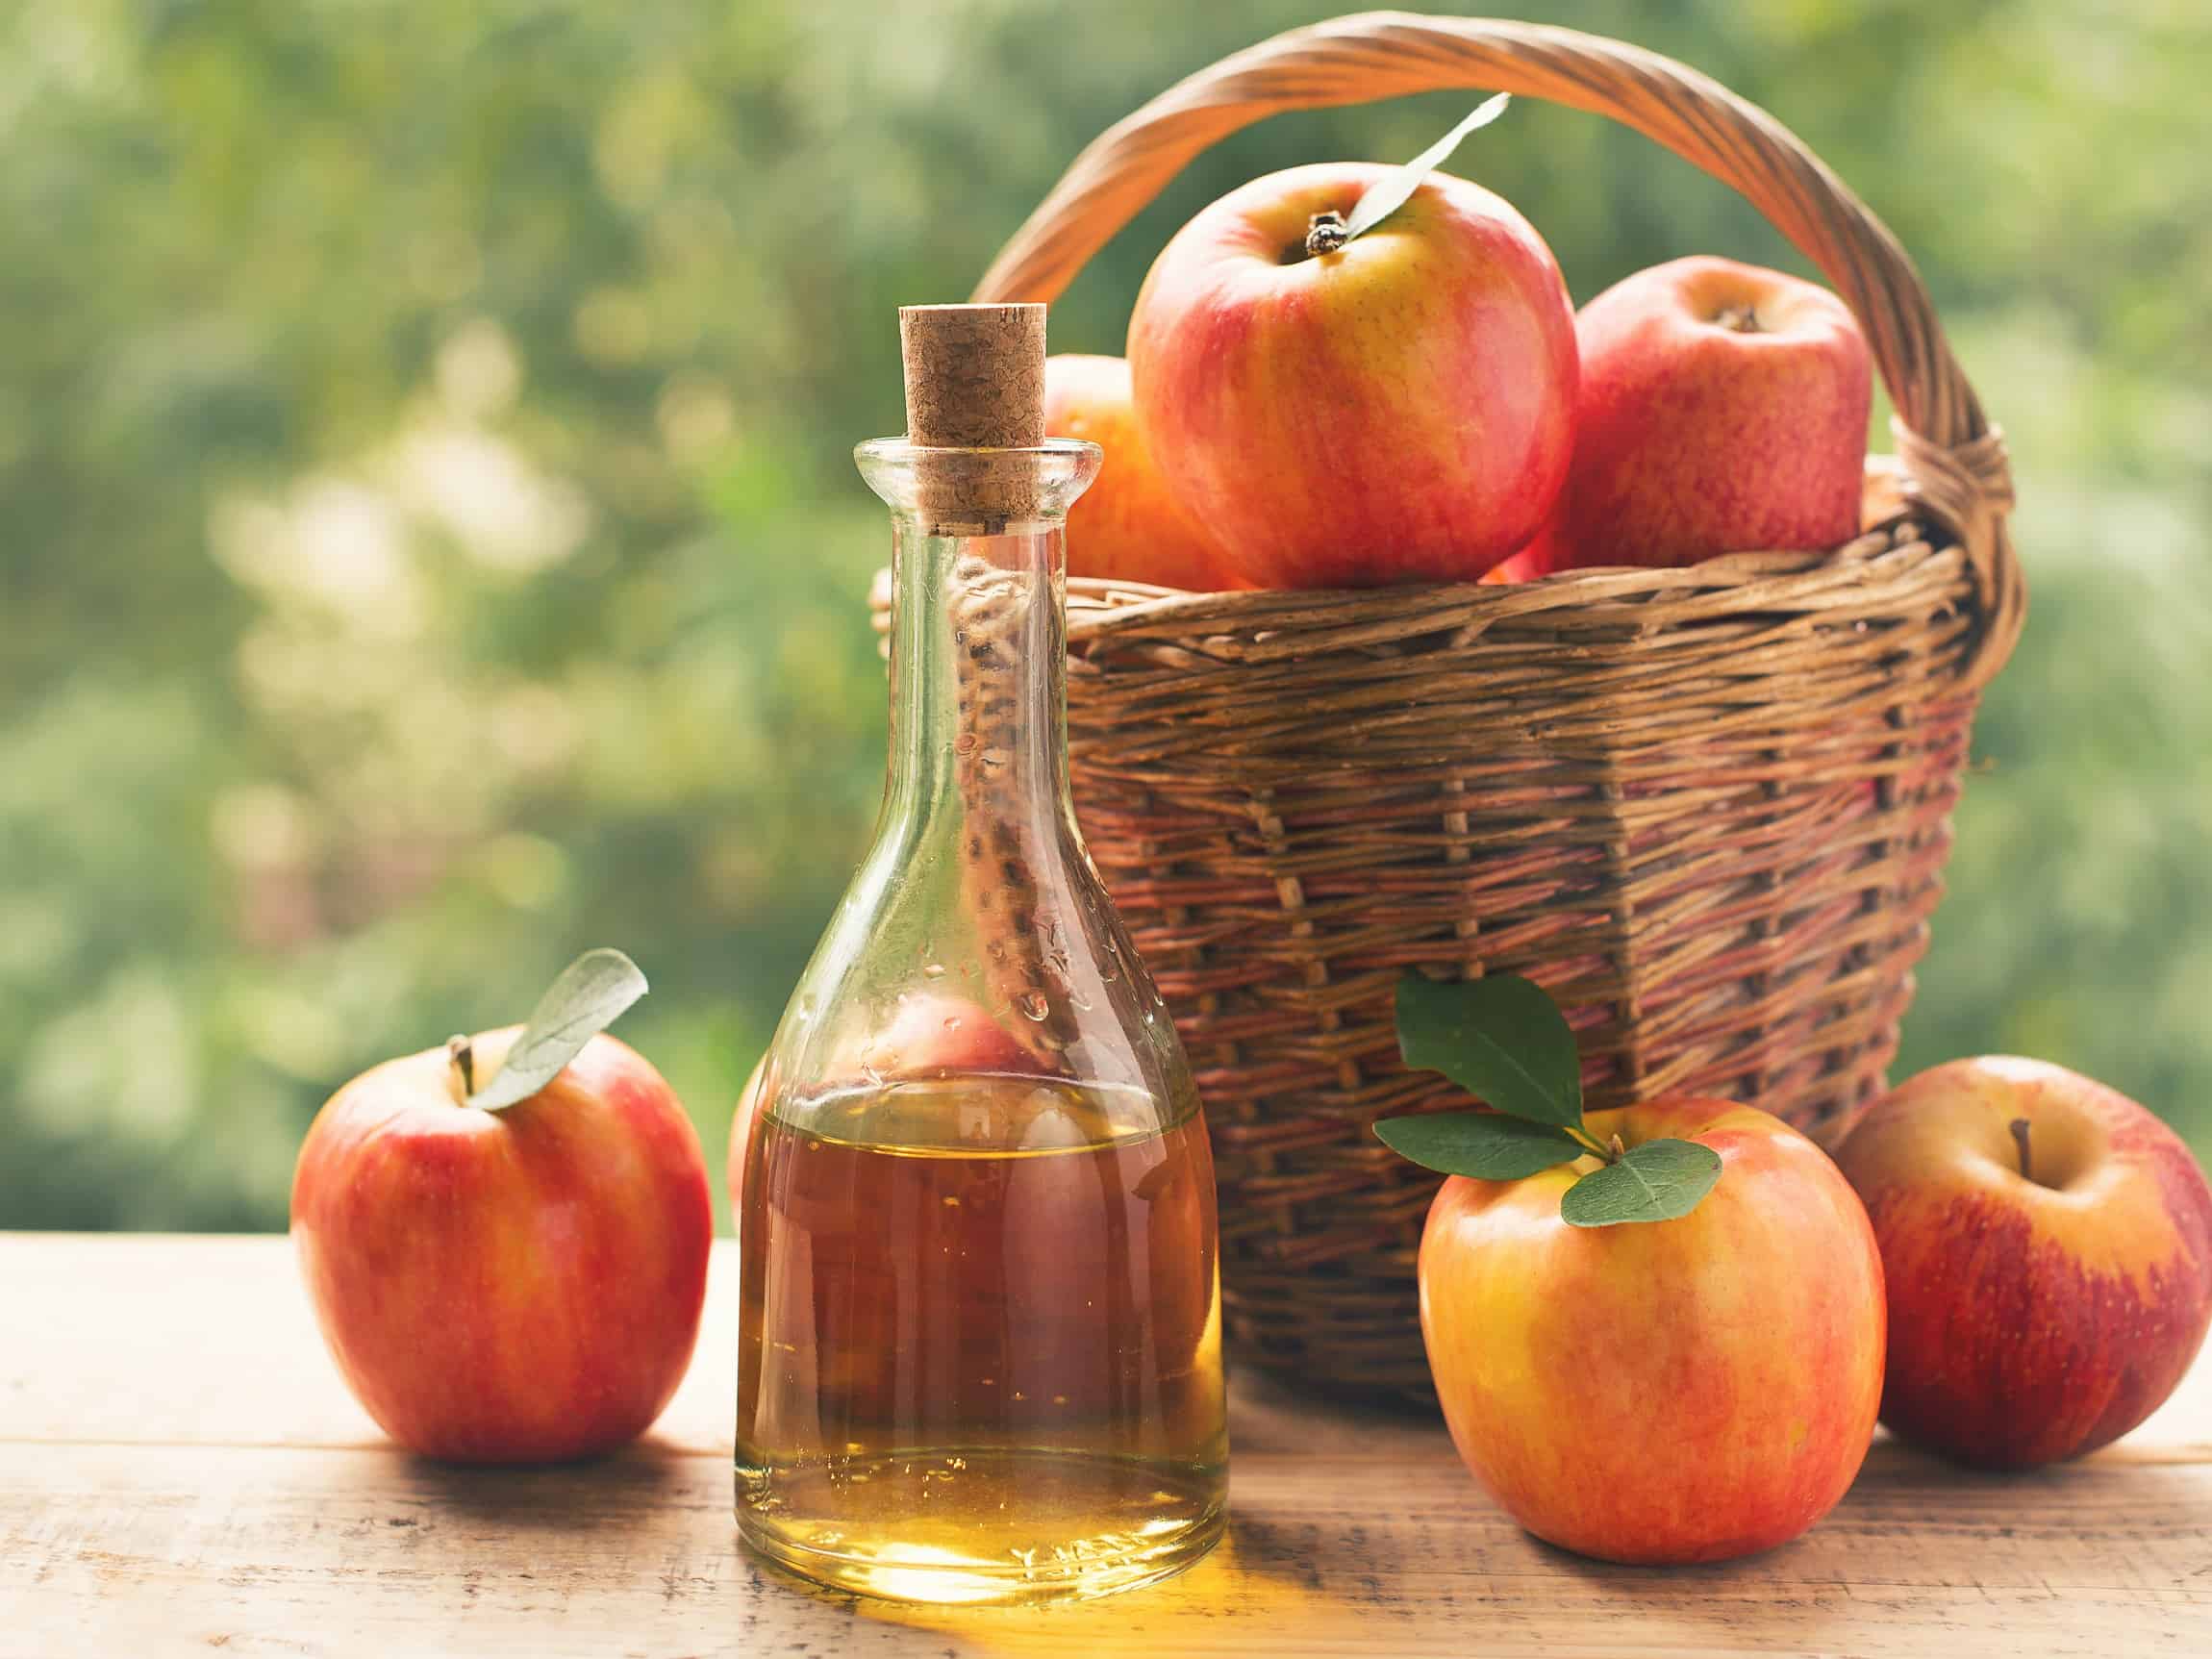 How does apple cider vinegar help with hair and scalp care?